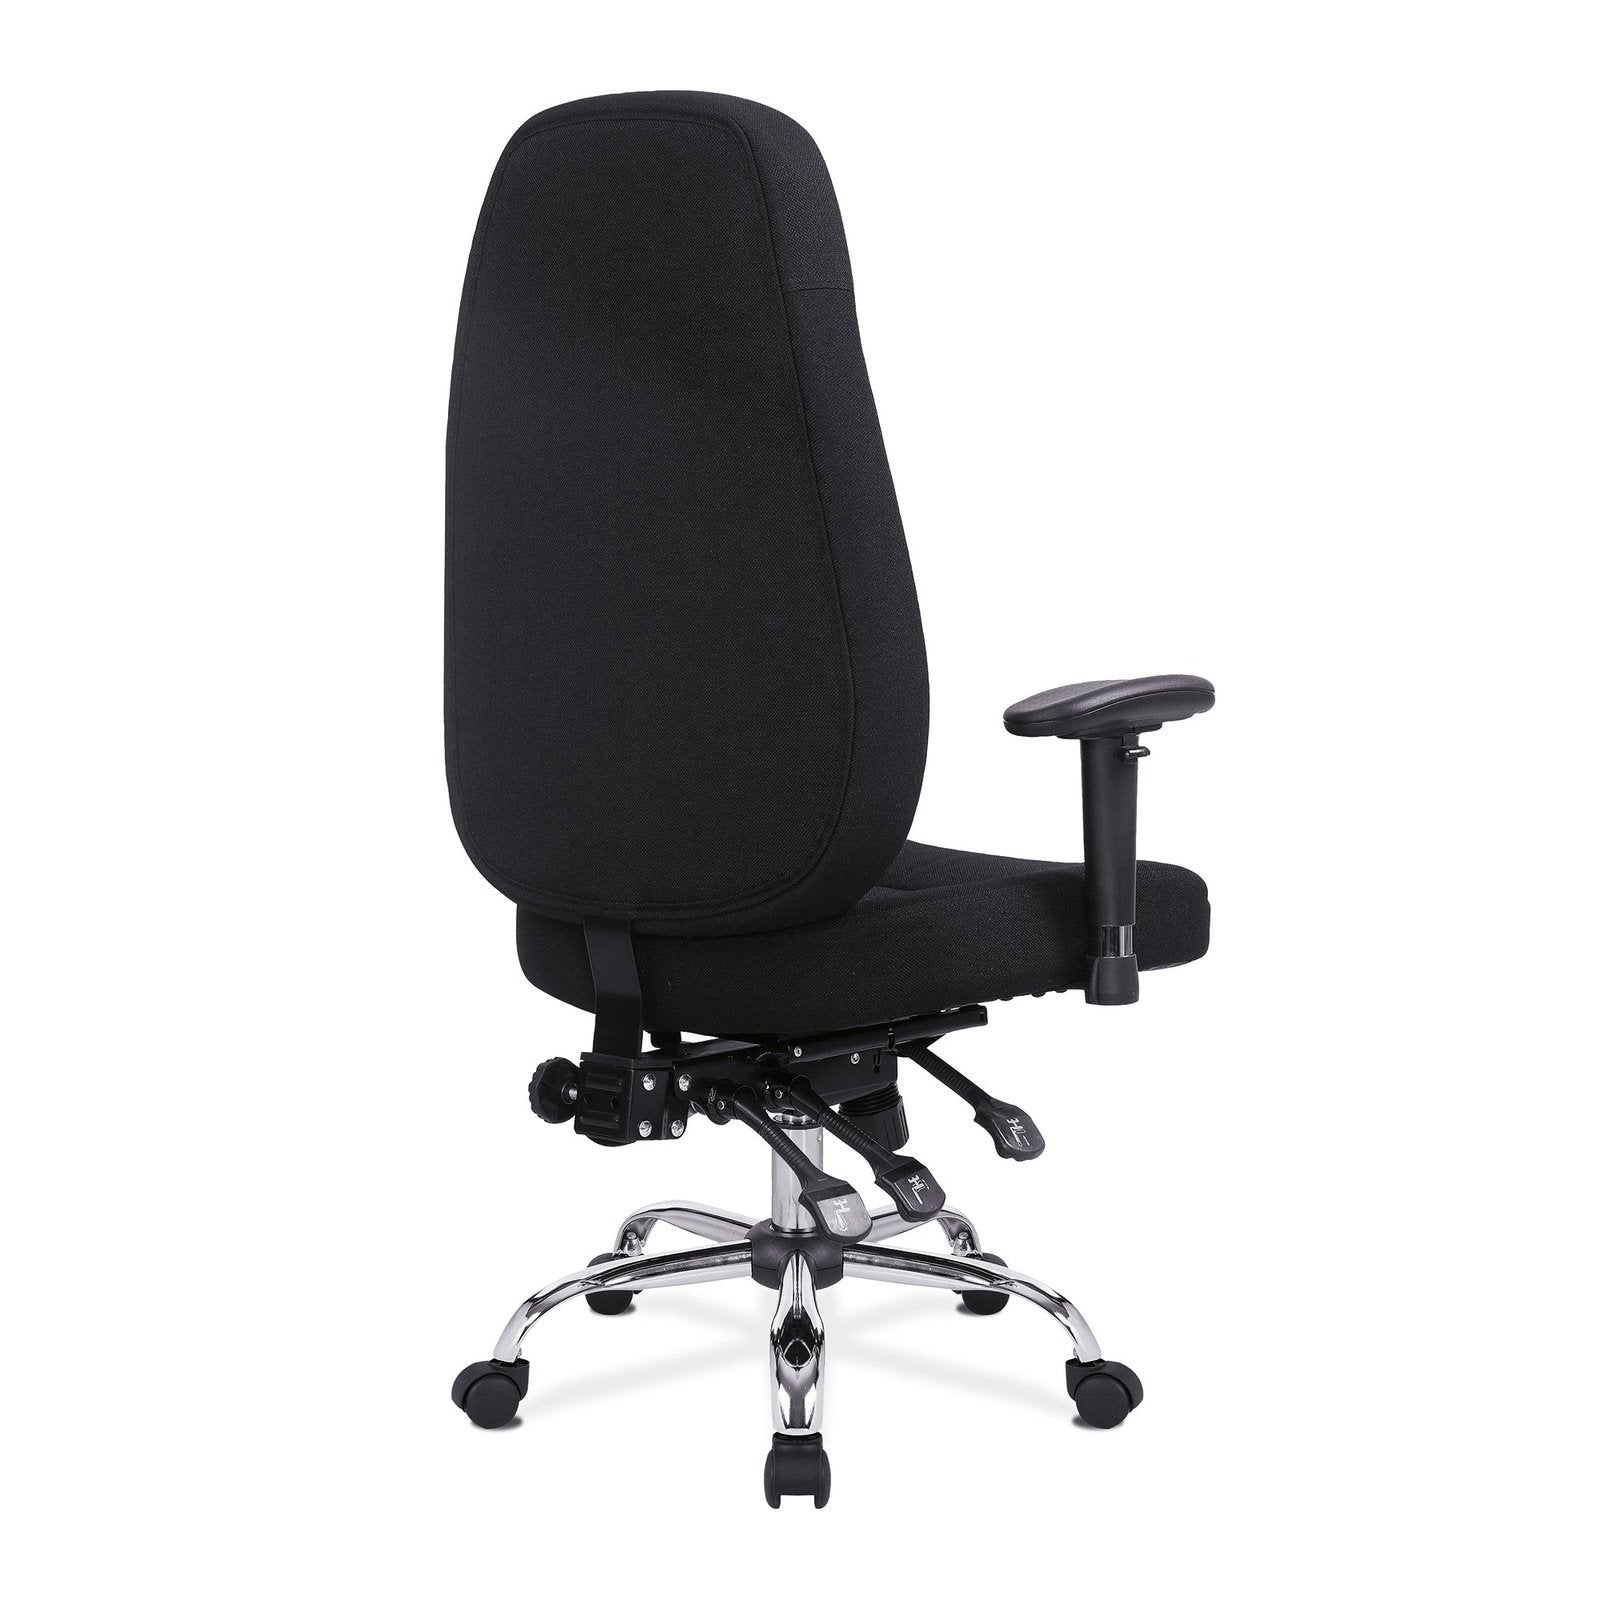 24 Hour Synchronous Operator Chair with Fabric Upholstery and Chrome Base - Office Products Online